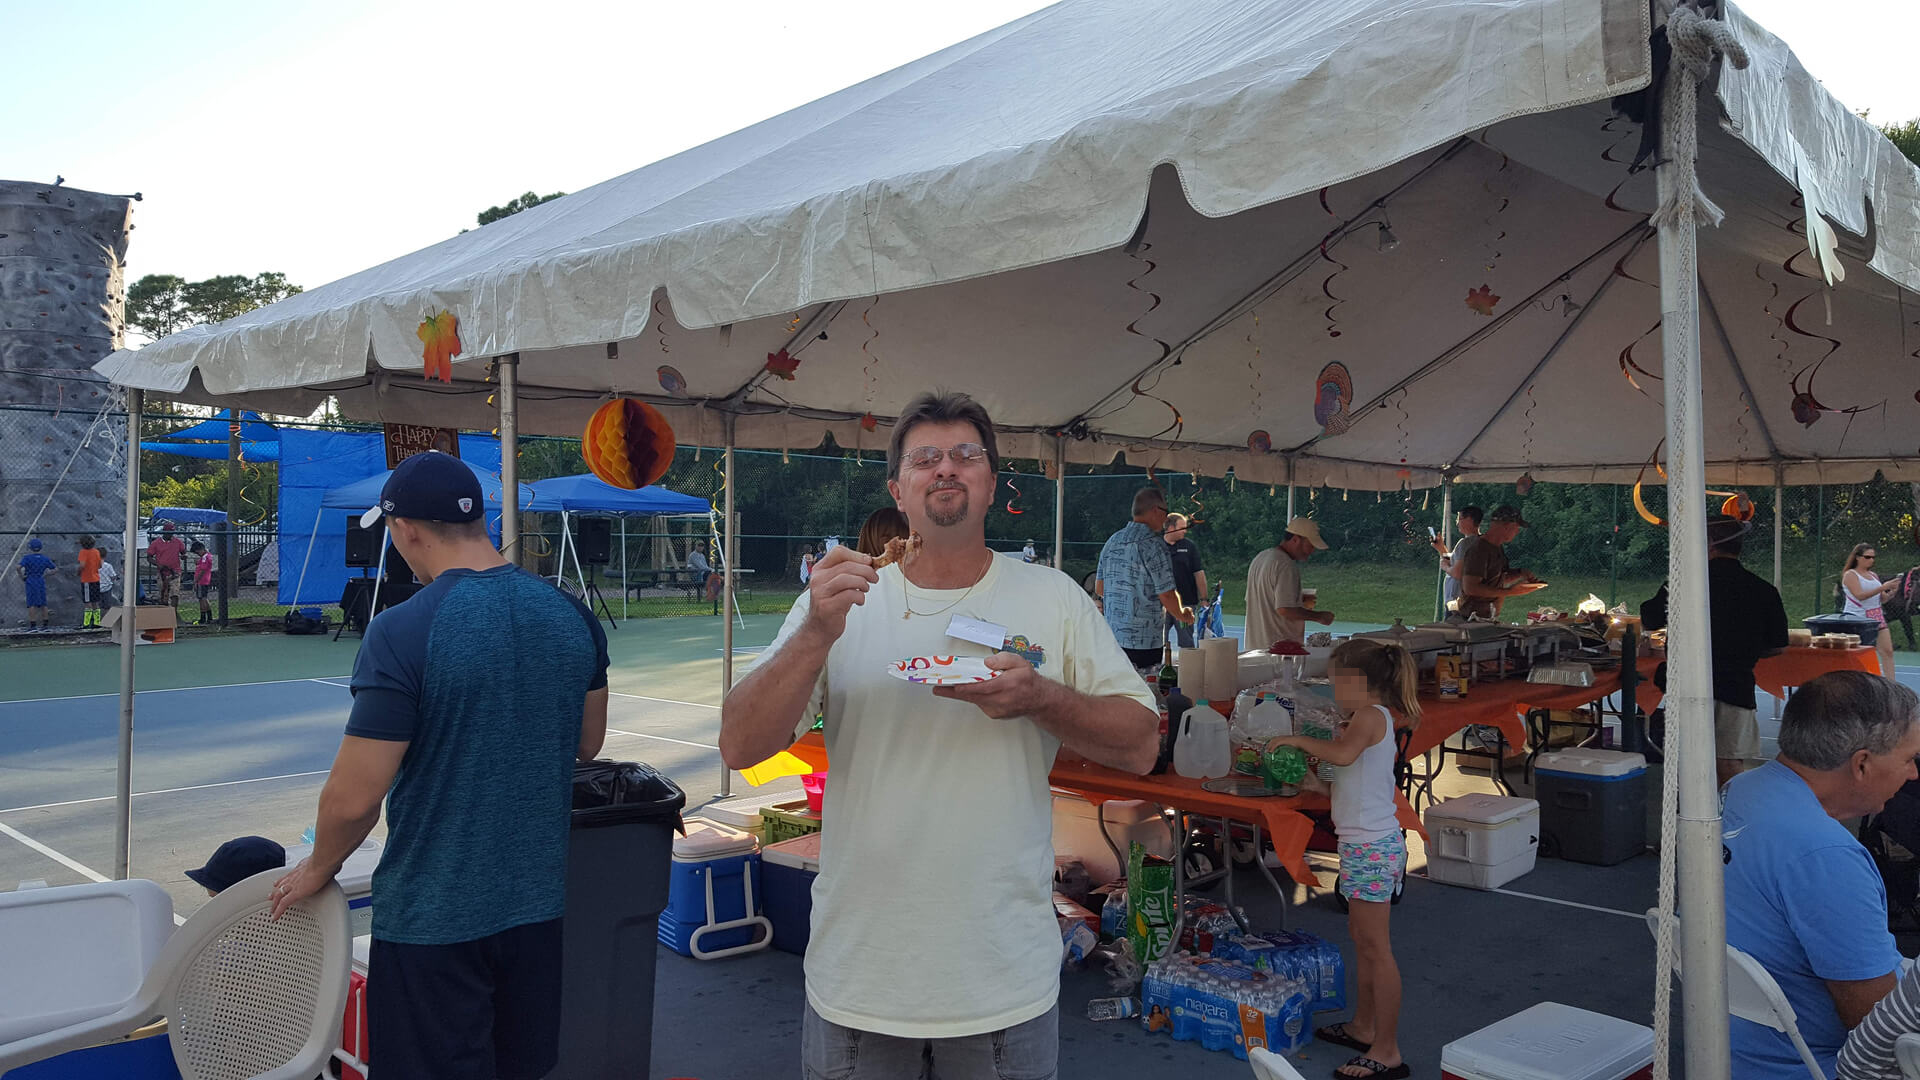 Residents are asked to each prepare a dish to share at our potluck tent. In recent years, residents have made some killer dishes such as swedish meatballs, homemade garlic knots, and even some scrumptious double-chocolate brownies!